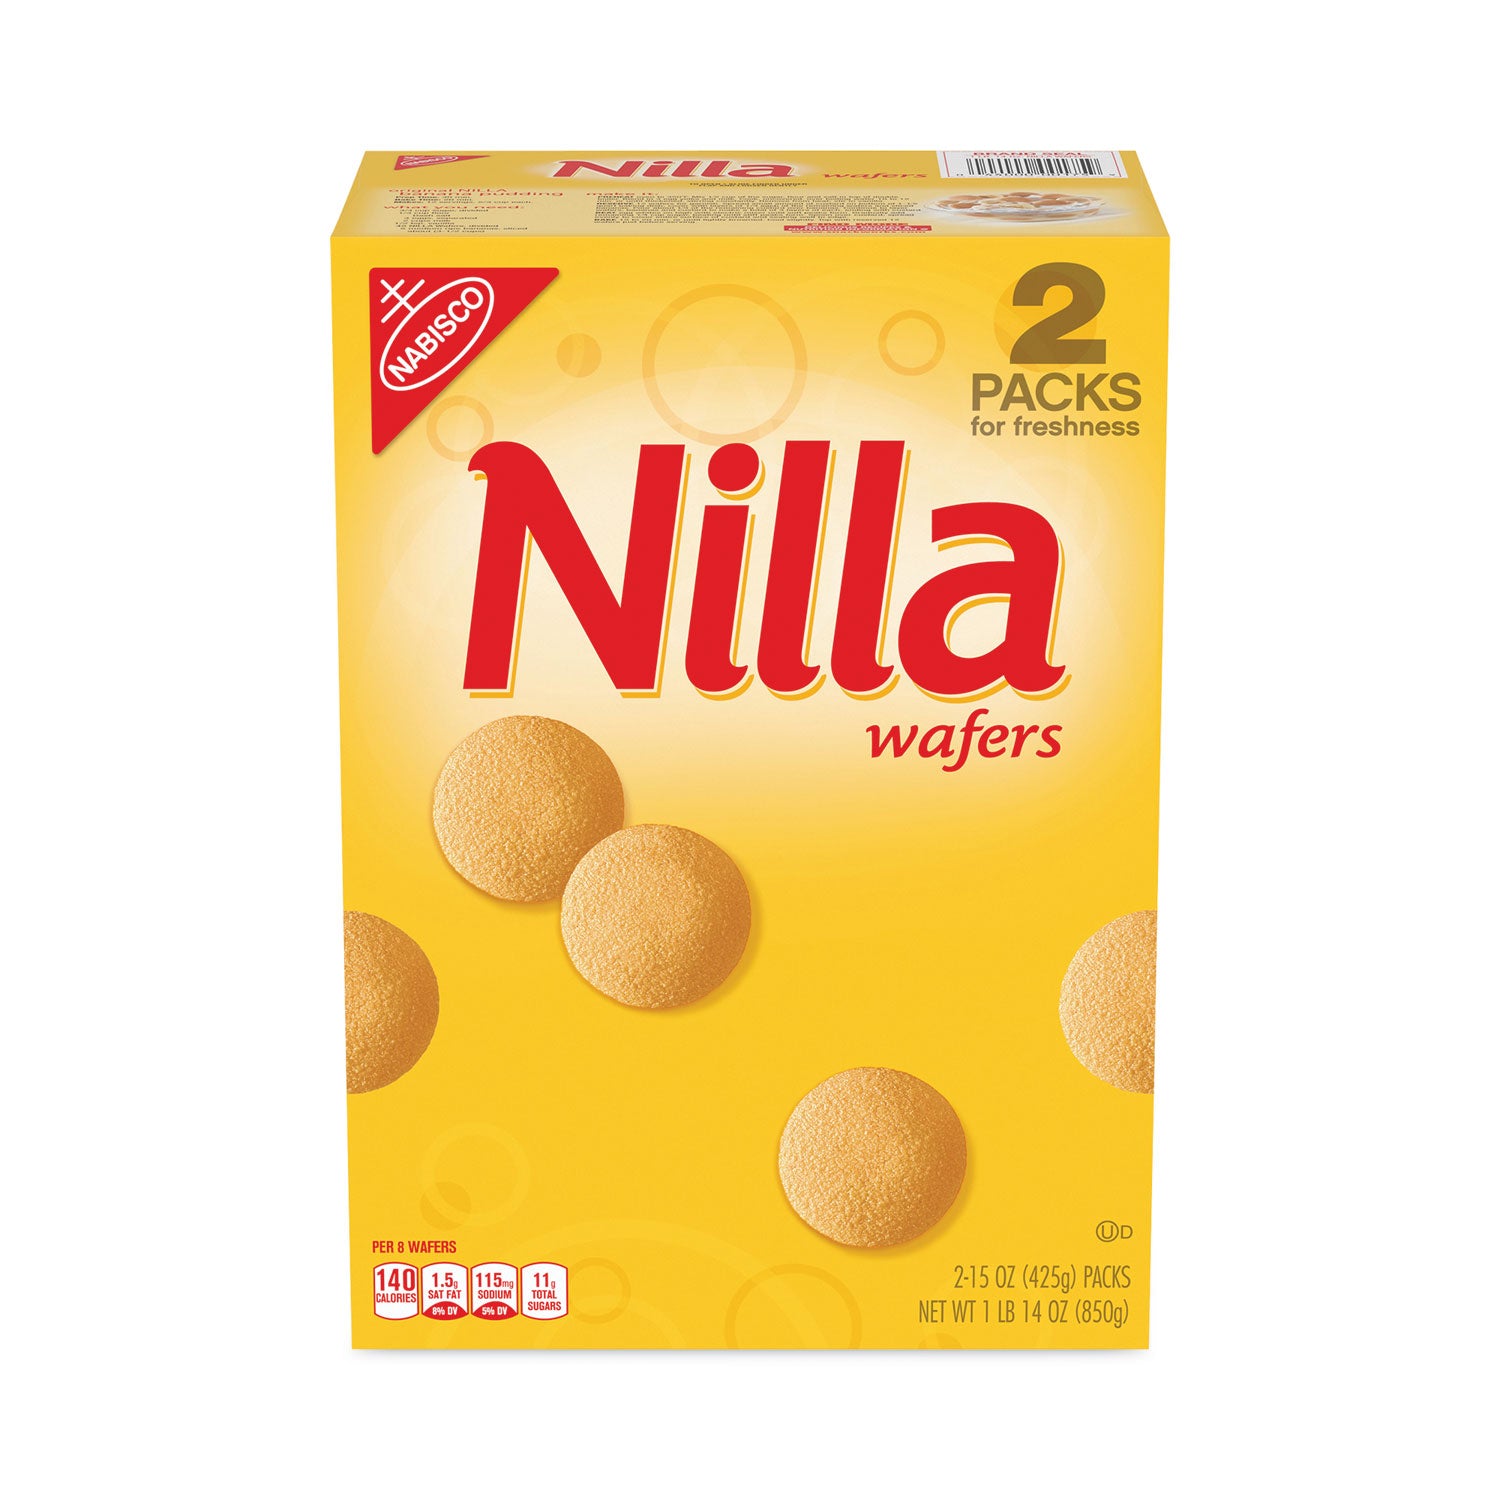 nilla-wafers-15-oz-box-2-boxes-pack-ships-in-1-3-business-days_grr22000427 - 1